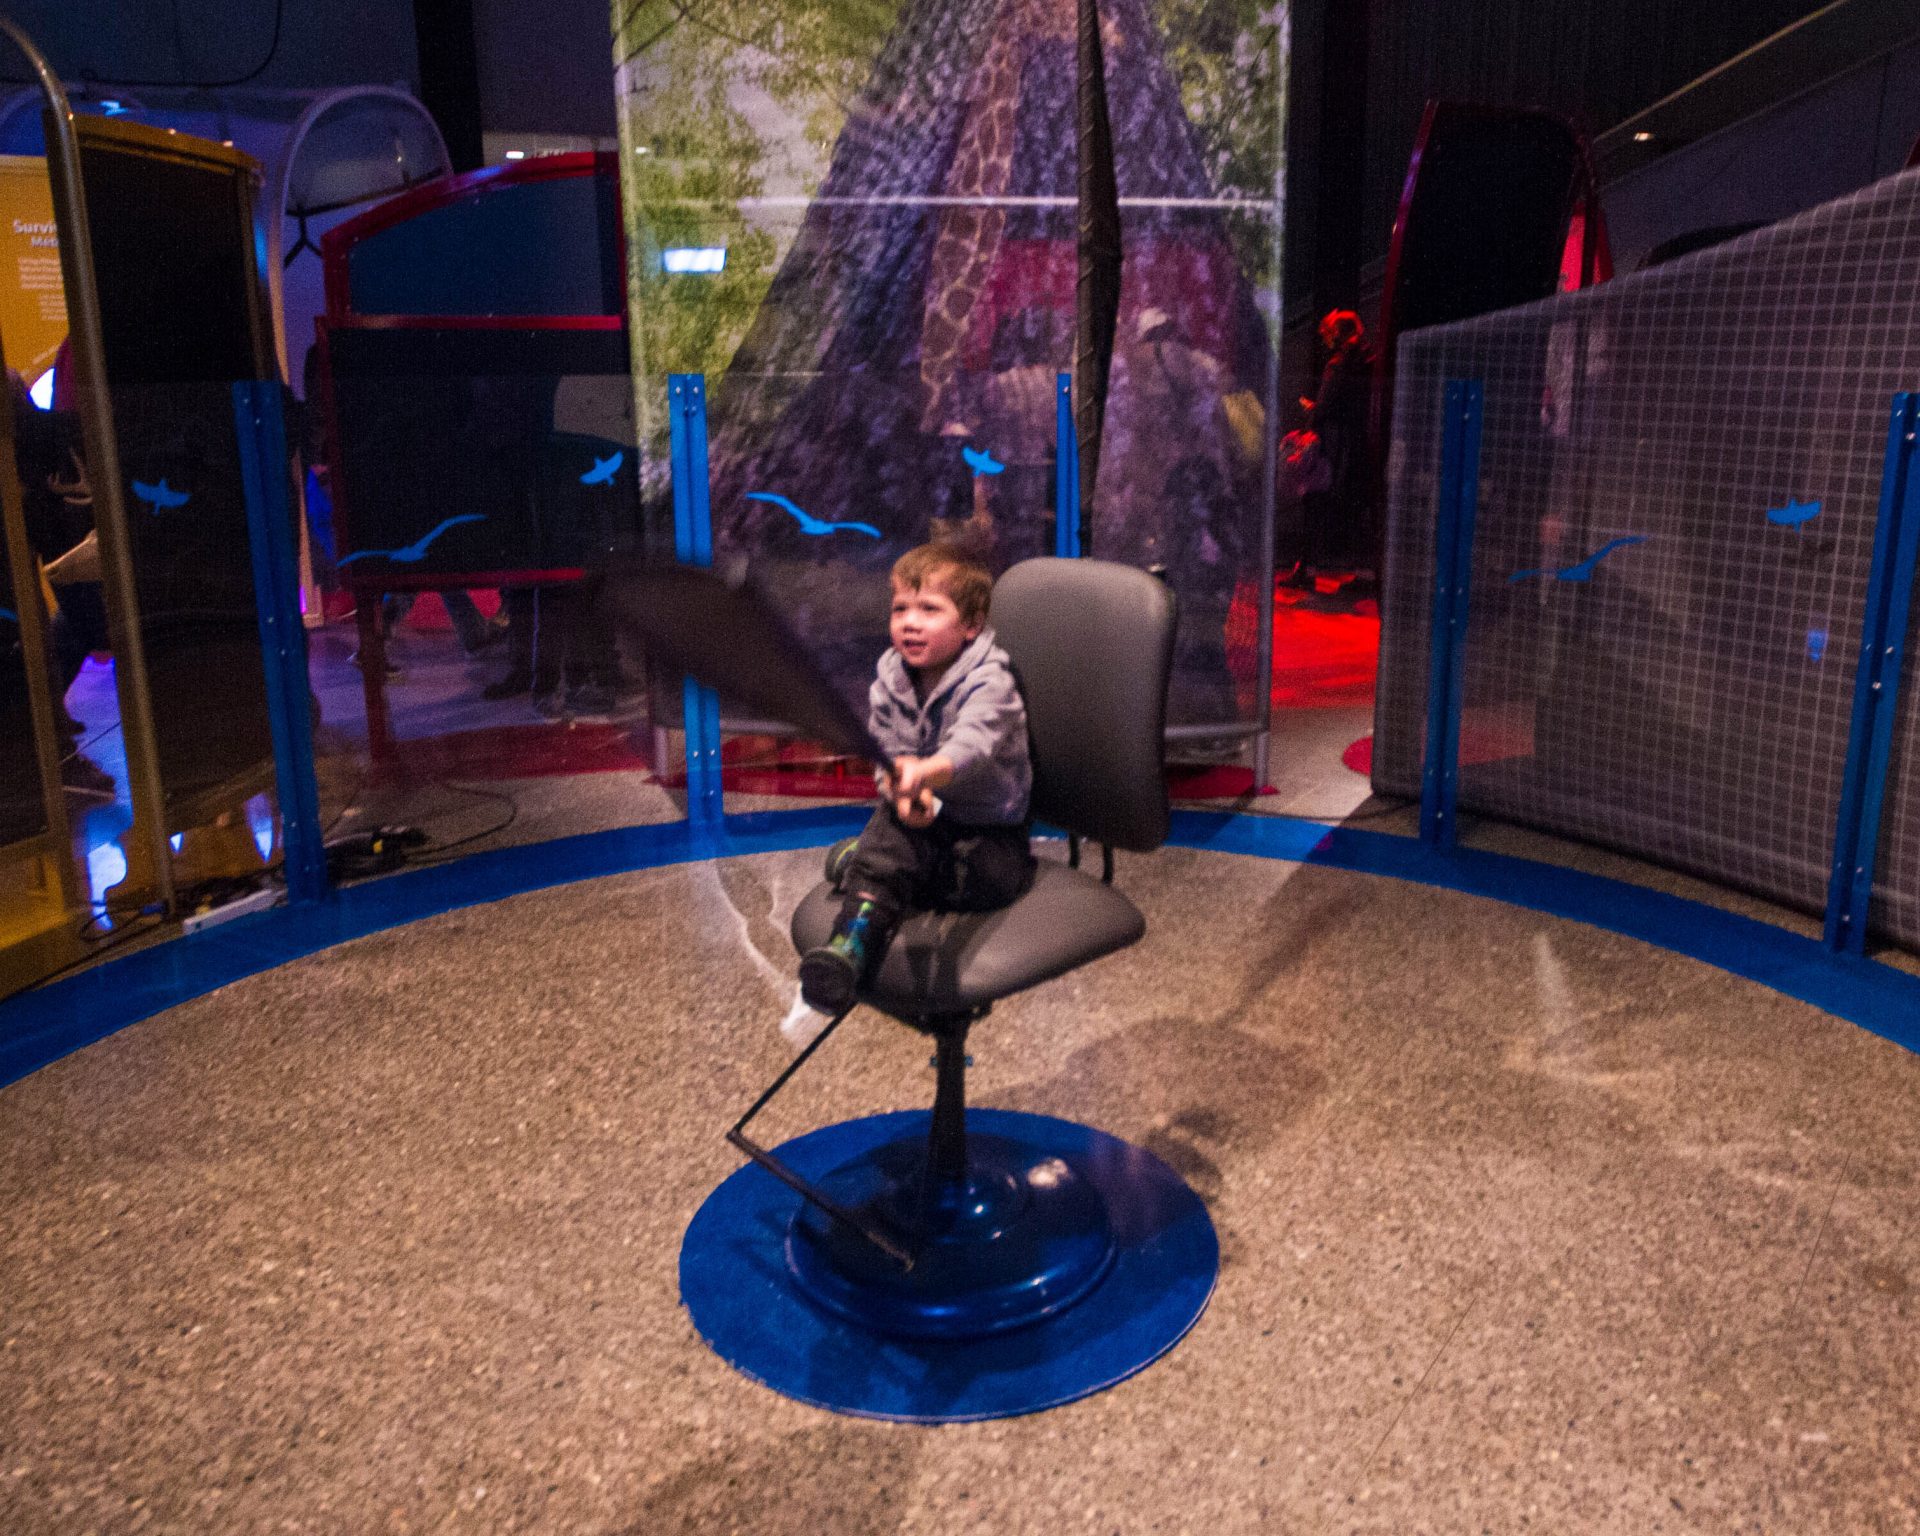 Small boy flaps a makeshift wing at the Ontario Science Centre Bio Mechanics Exhibit